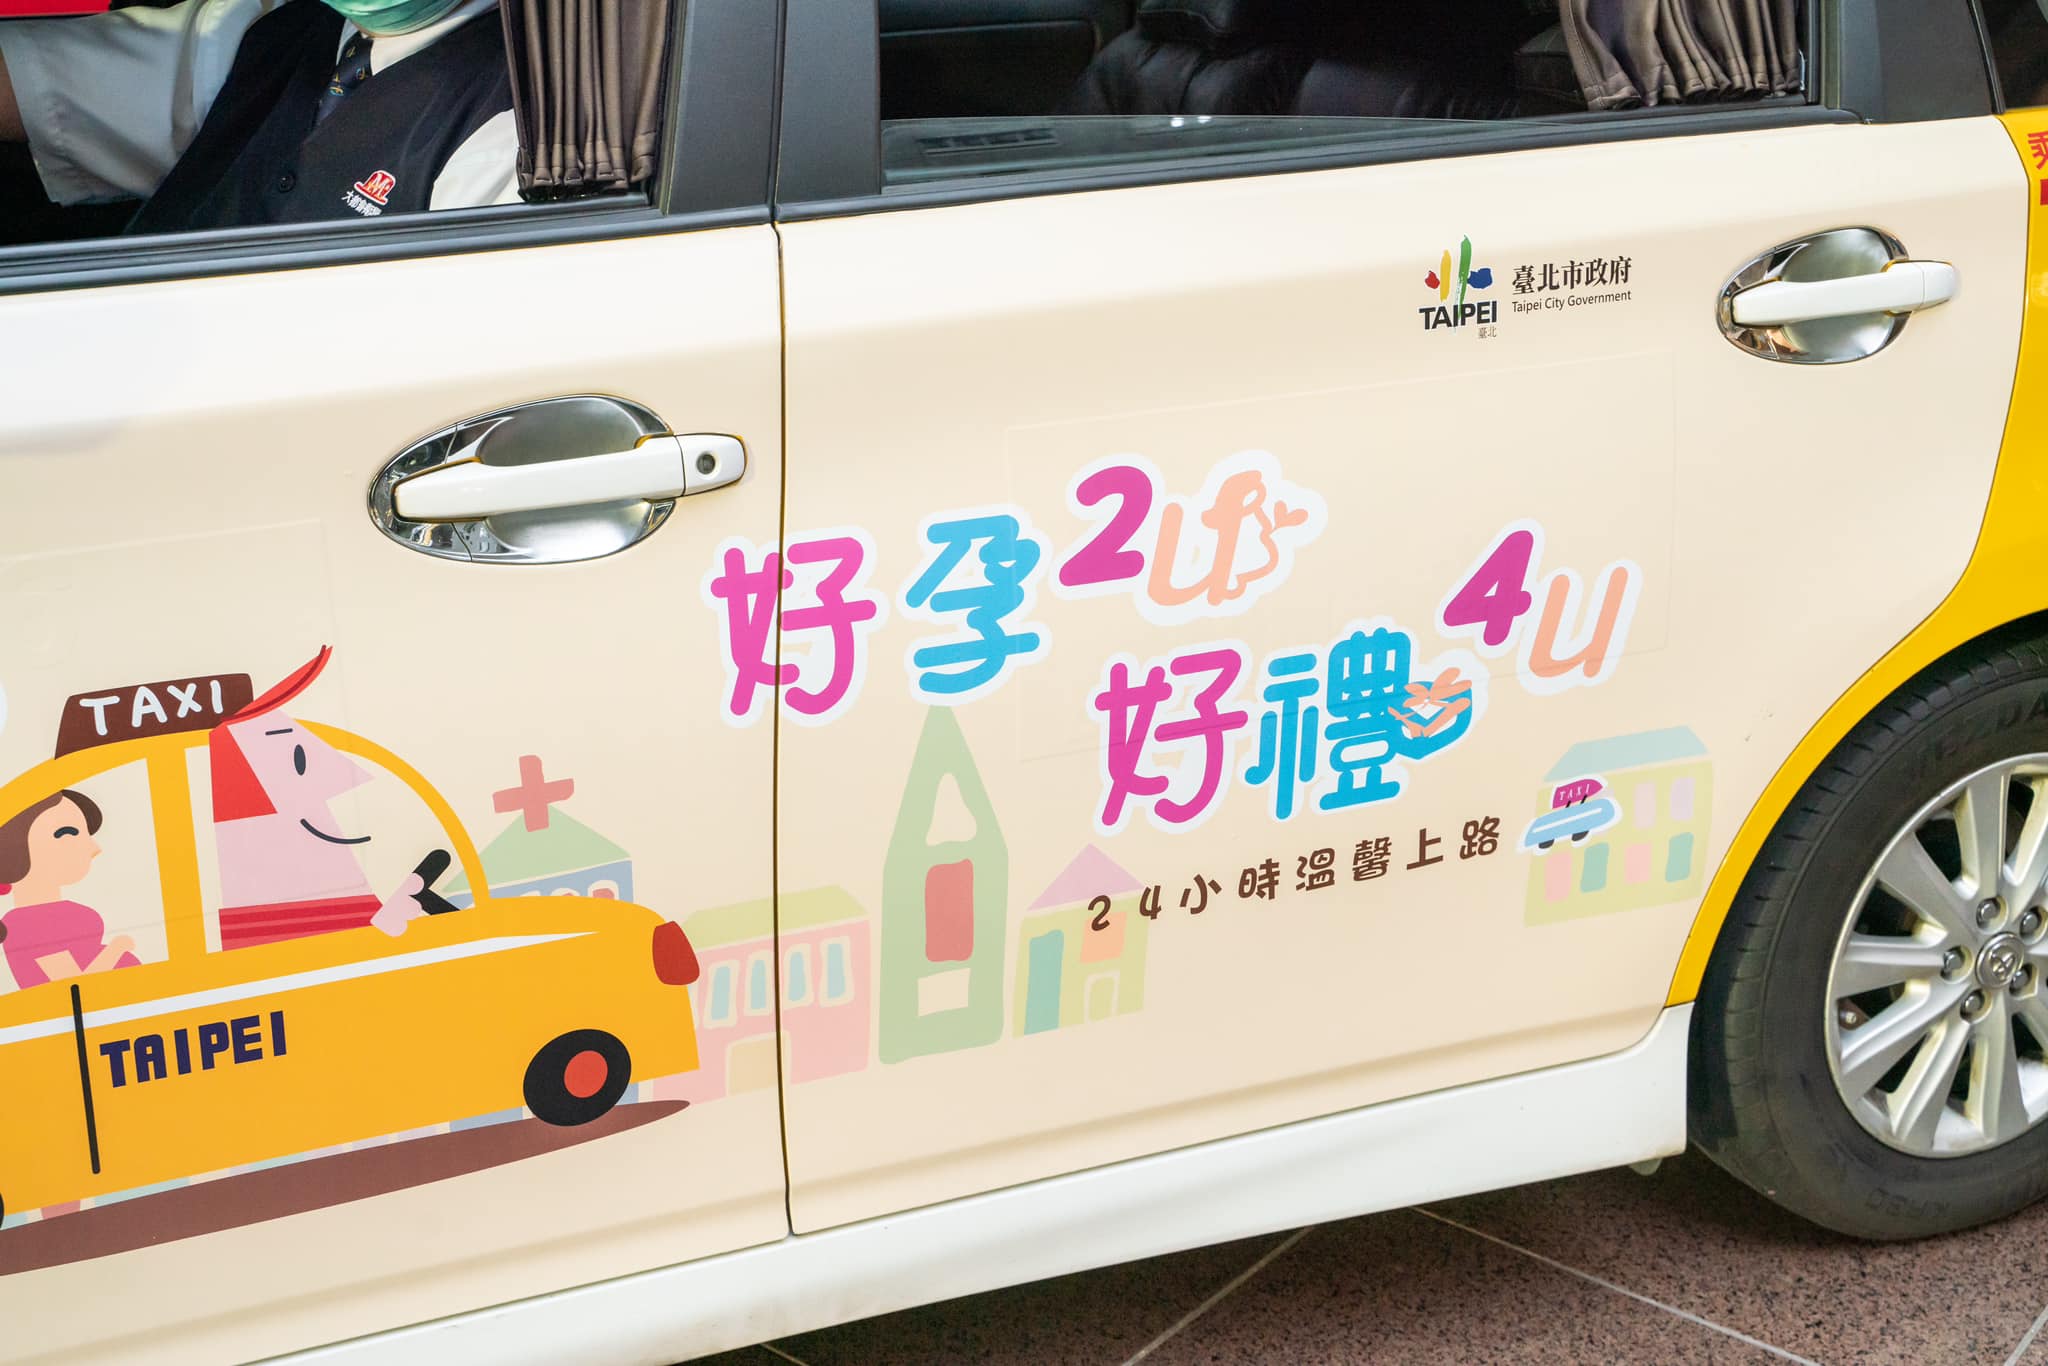 2U Pregnancy Special Car subsidizes NT$ 8,000 for expectant mothers.  Photo reproduced from 蔣萬安 Facebook